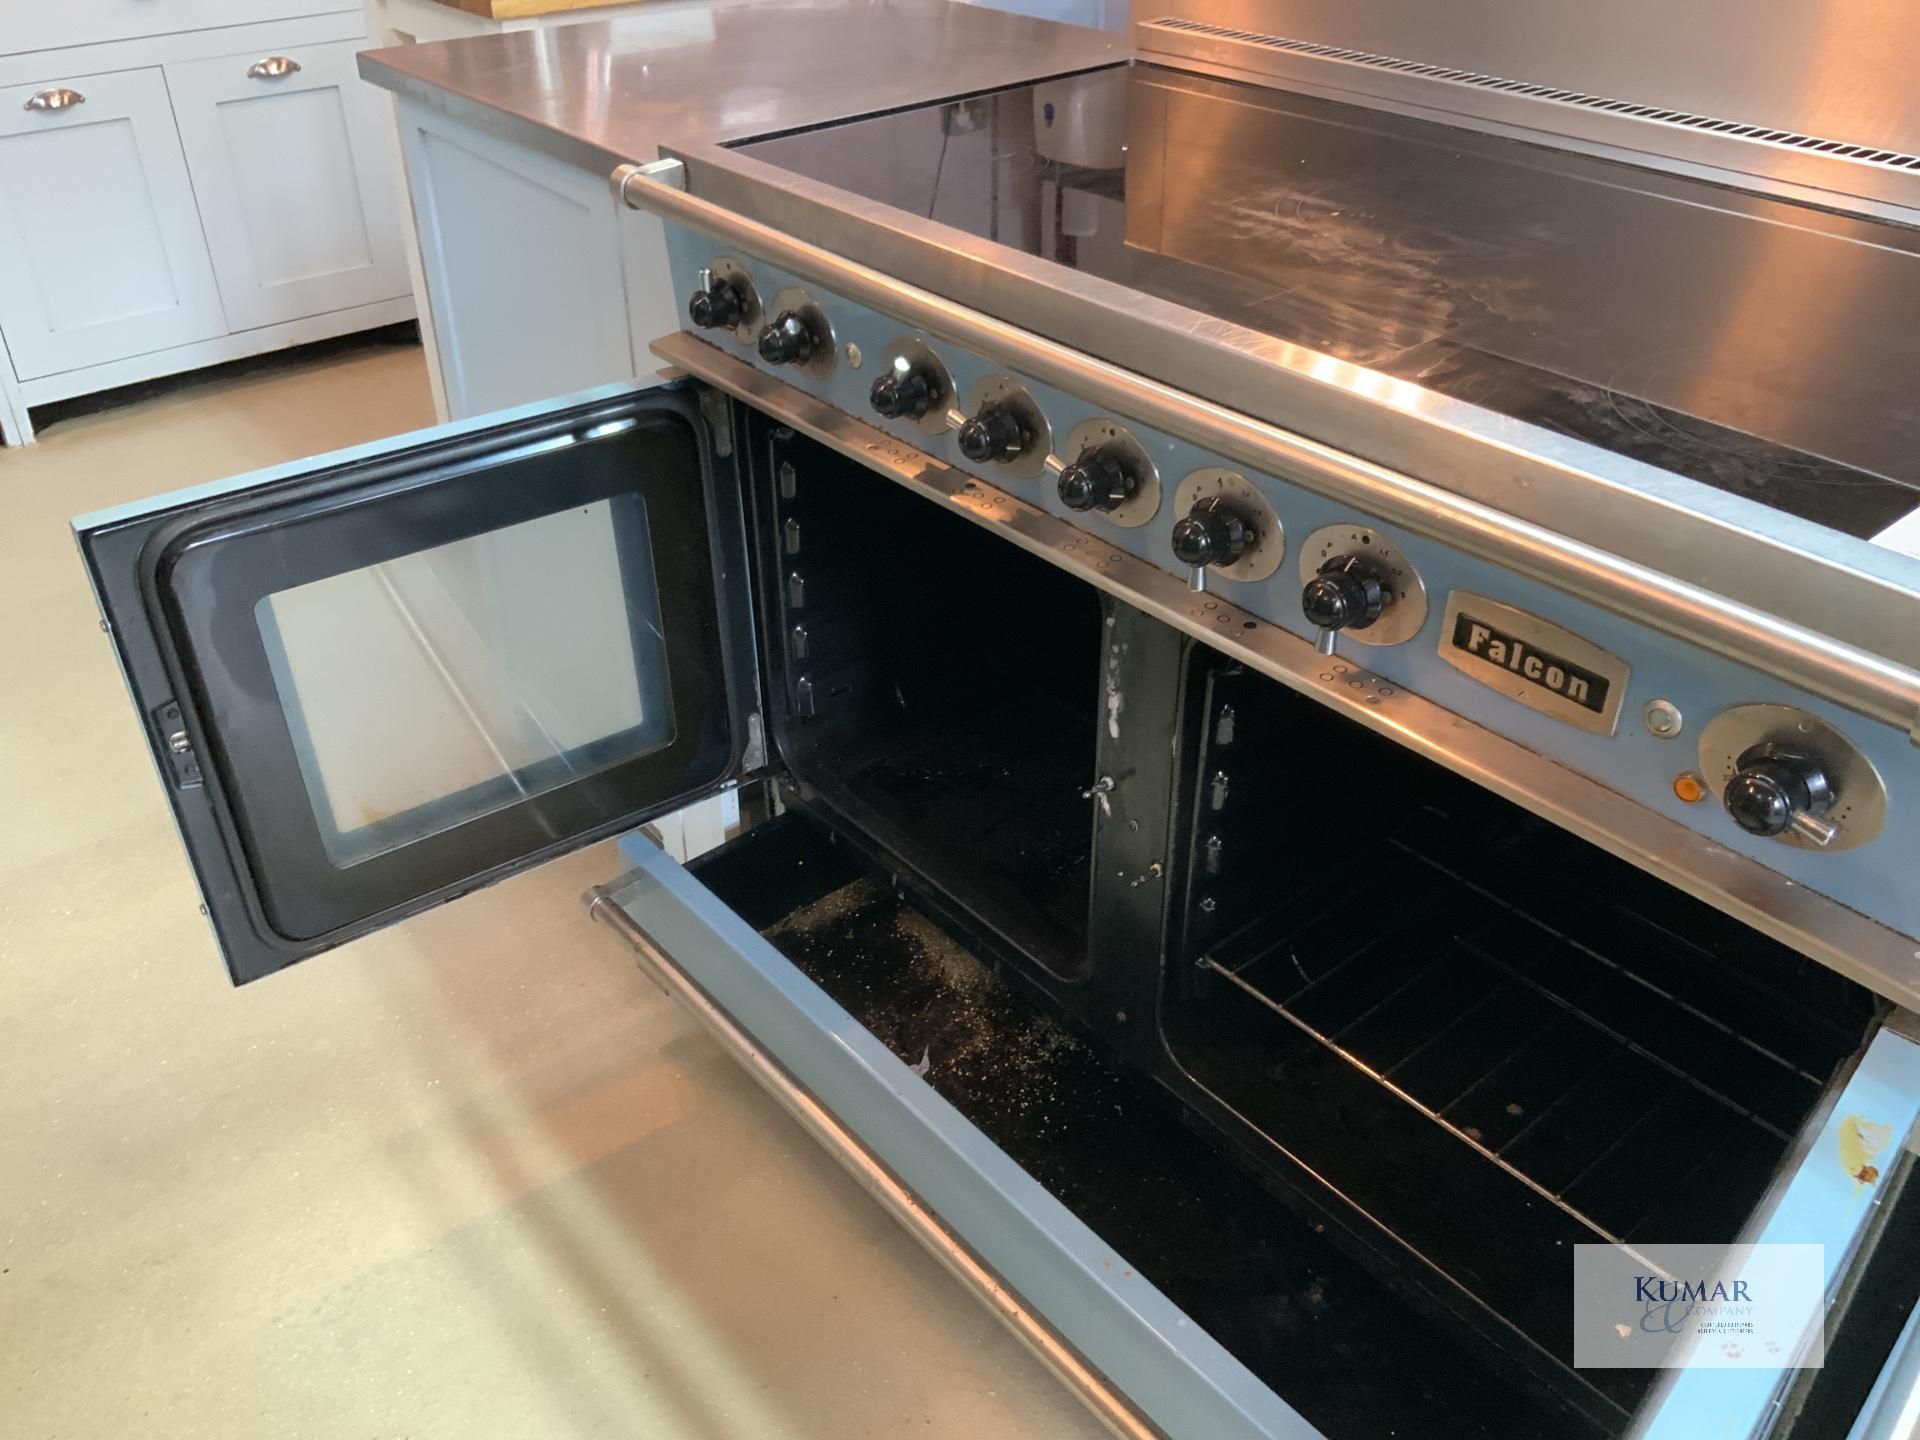 China Blue Aga Rangemaster Falcon Continental 1092 Range Cookers with Twin Ovens & 5 Position - Image 8 of 8